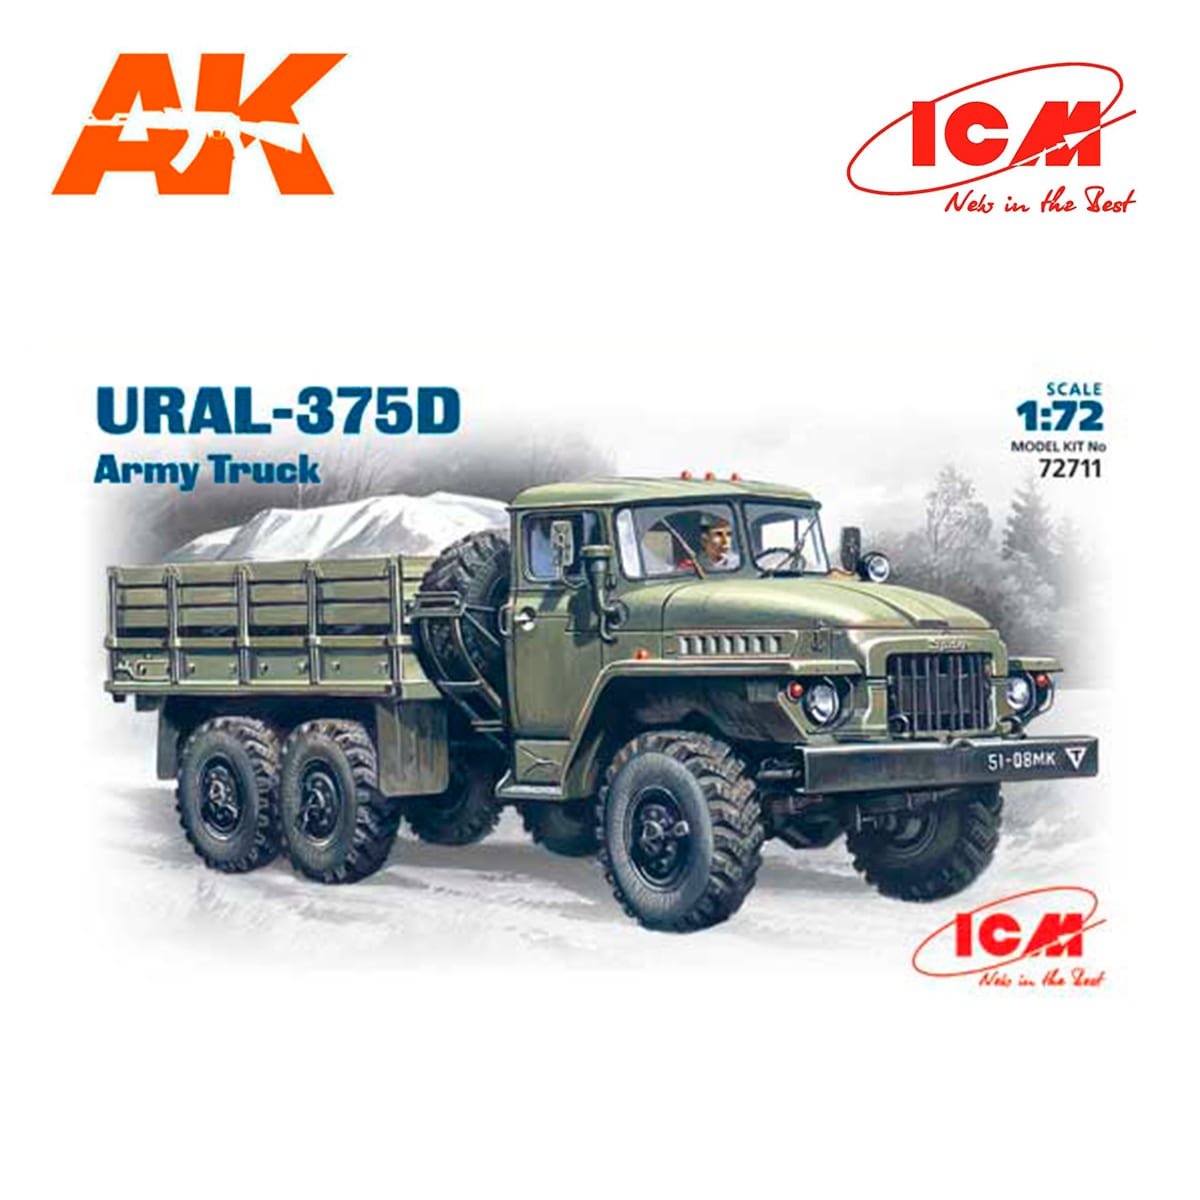 ICM 1/35 Scale Ural 4320 Soviet Army Truck Military Model Kit # 35371 for sale online 